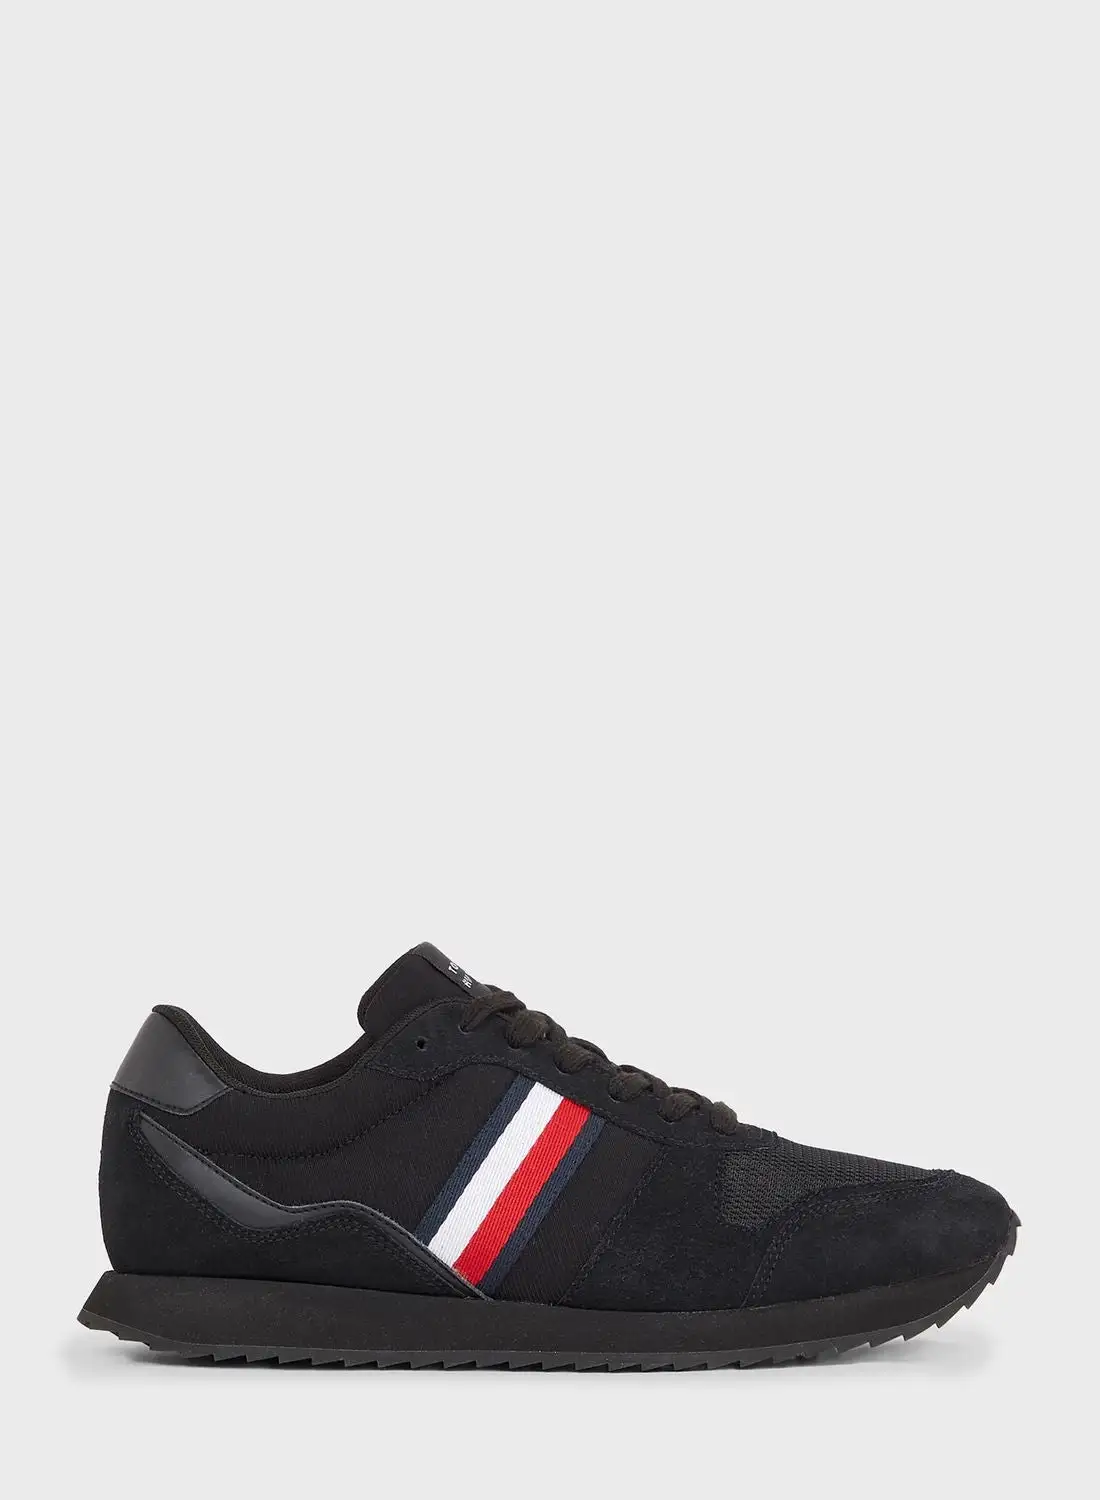 TOMMY HILFIGER Casual Low Top Sneakers